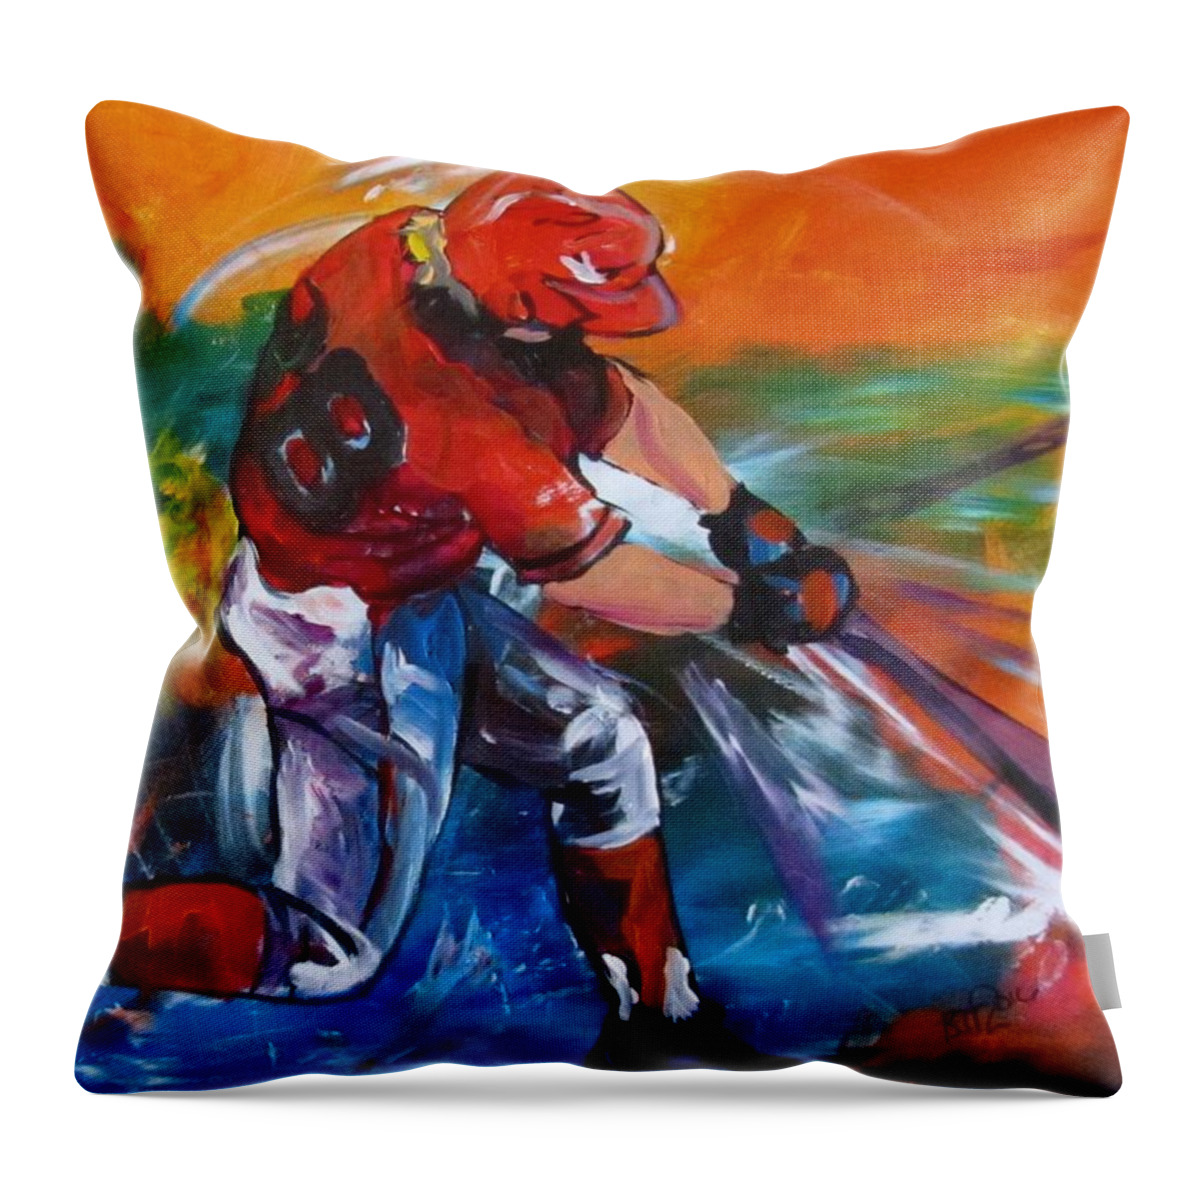 Baseball Throw Pillow featuring the painting Strike by Barbara O'Toole